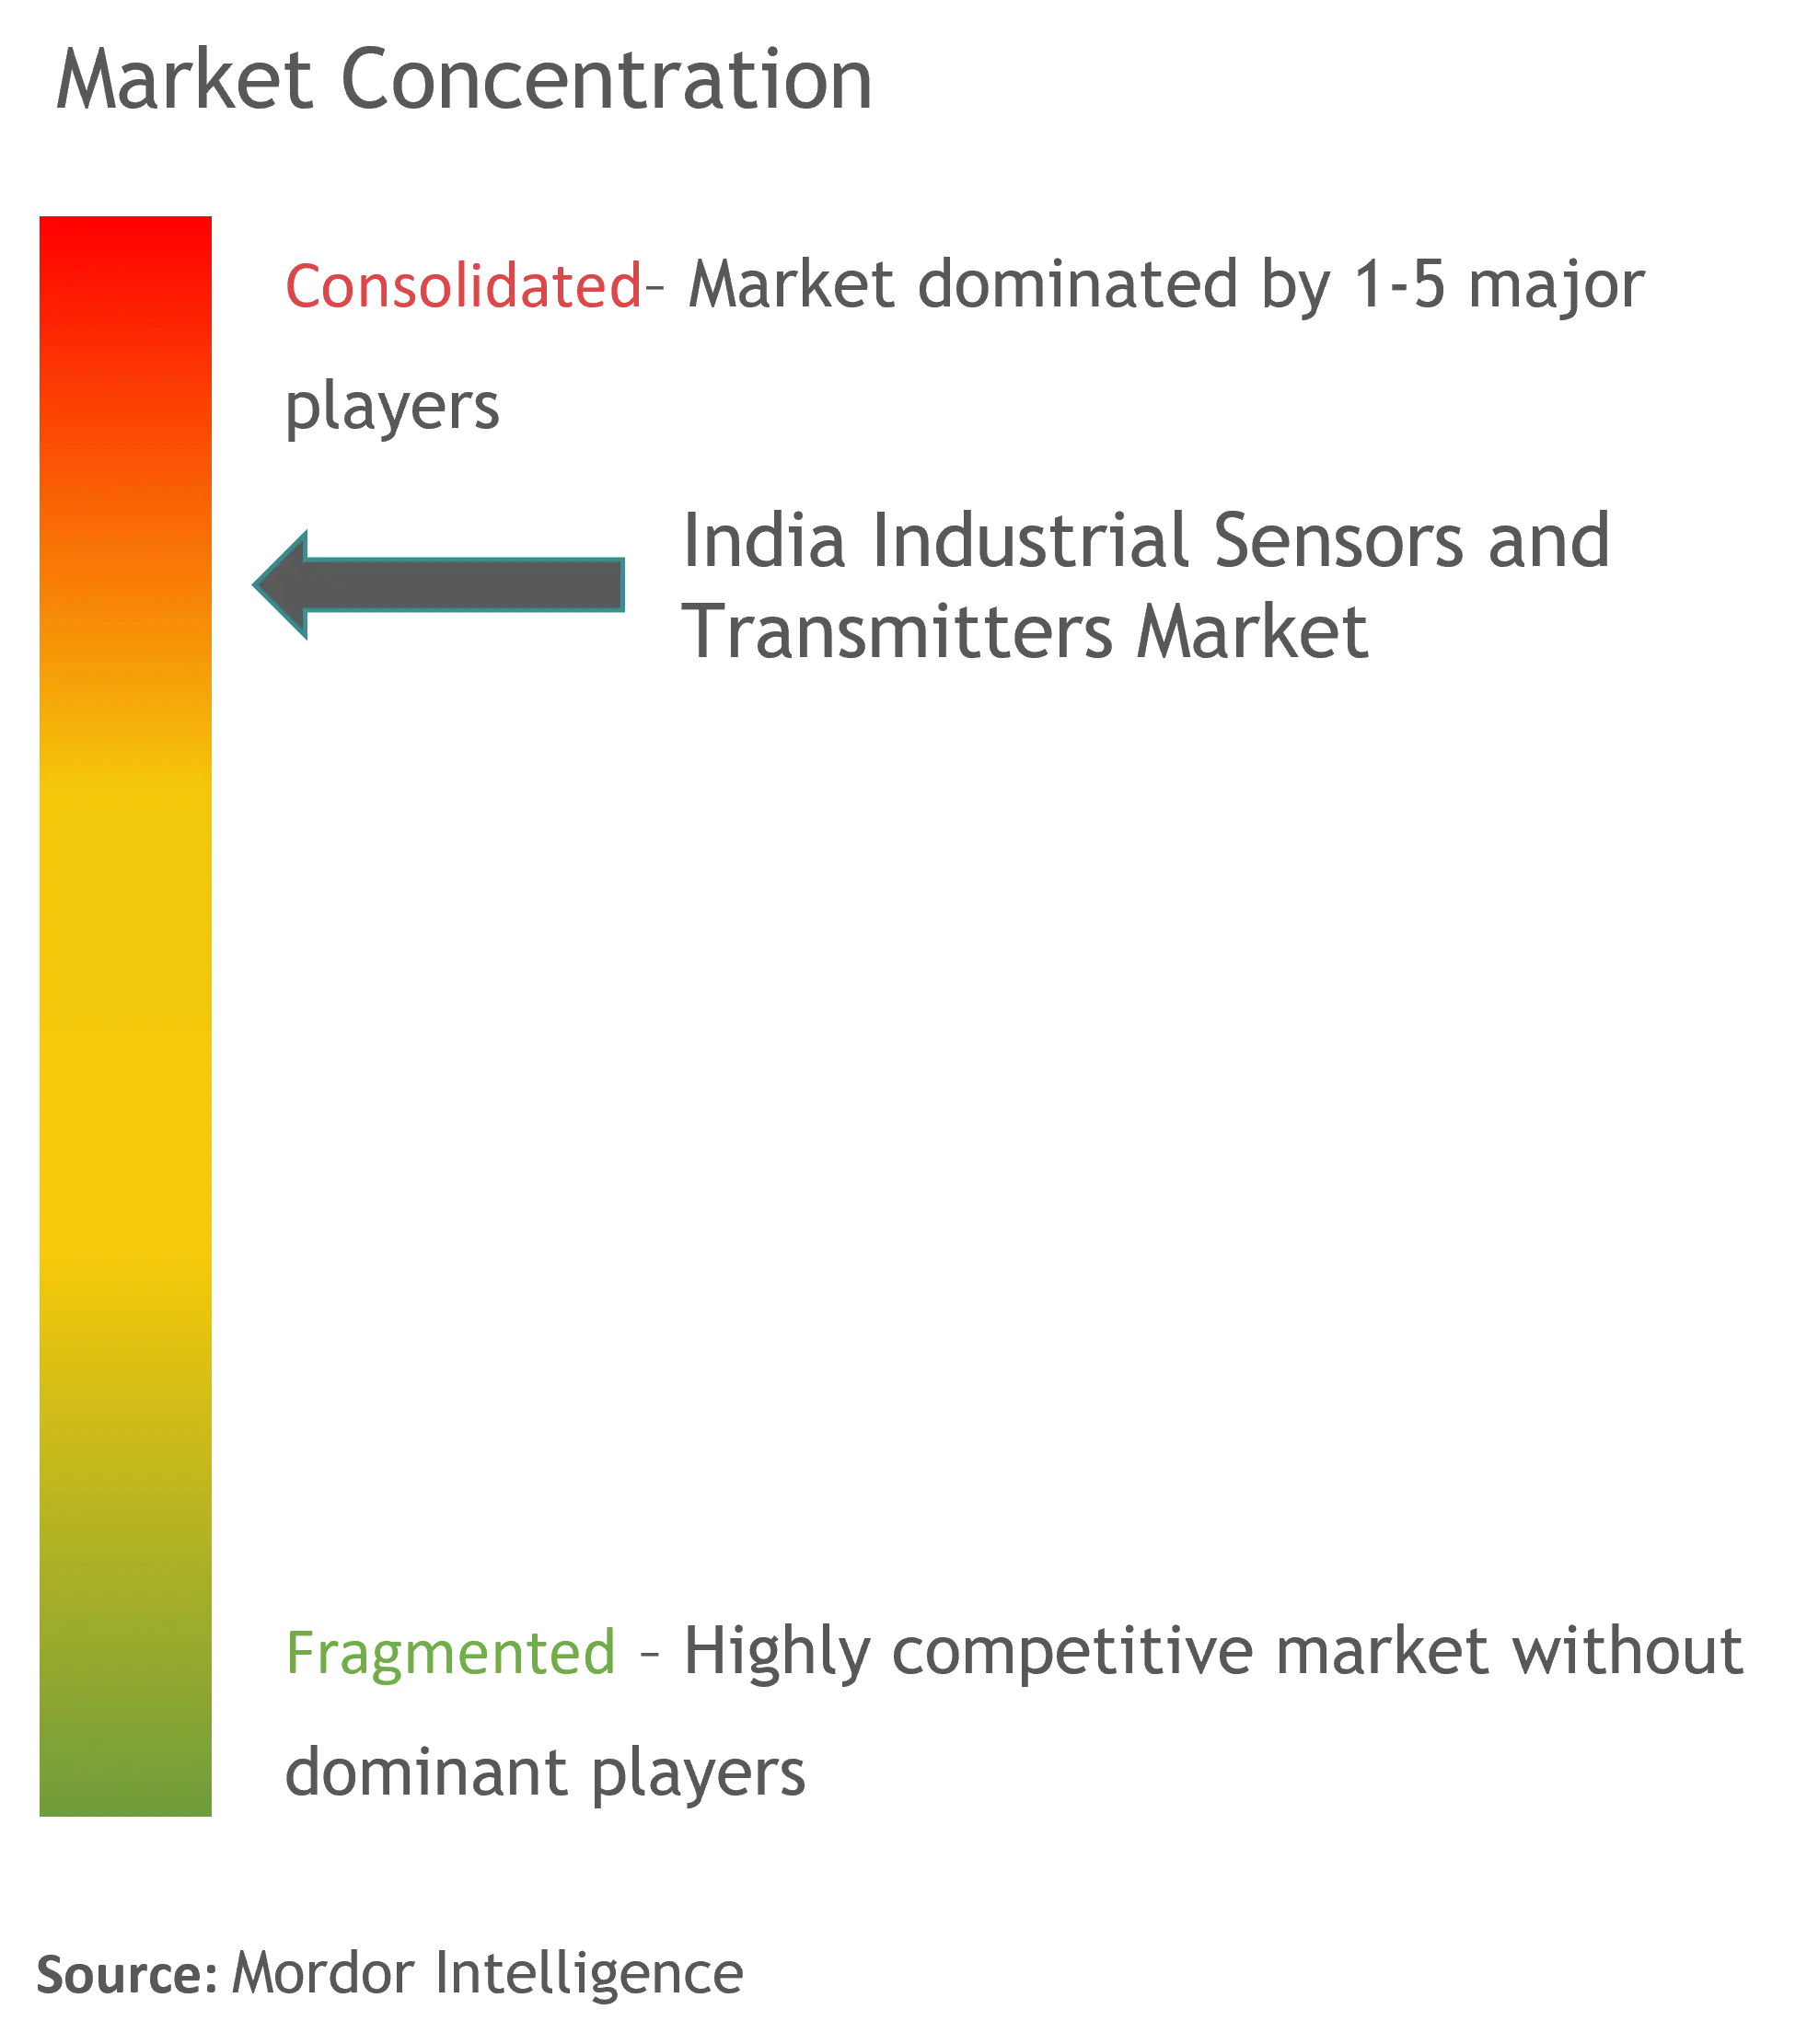 India Industrial Sensors and Transmitters Market Concentration